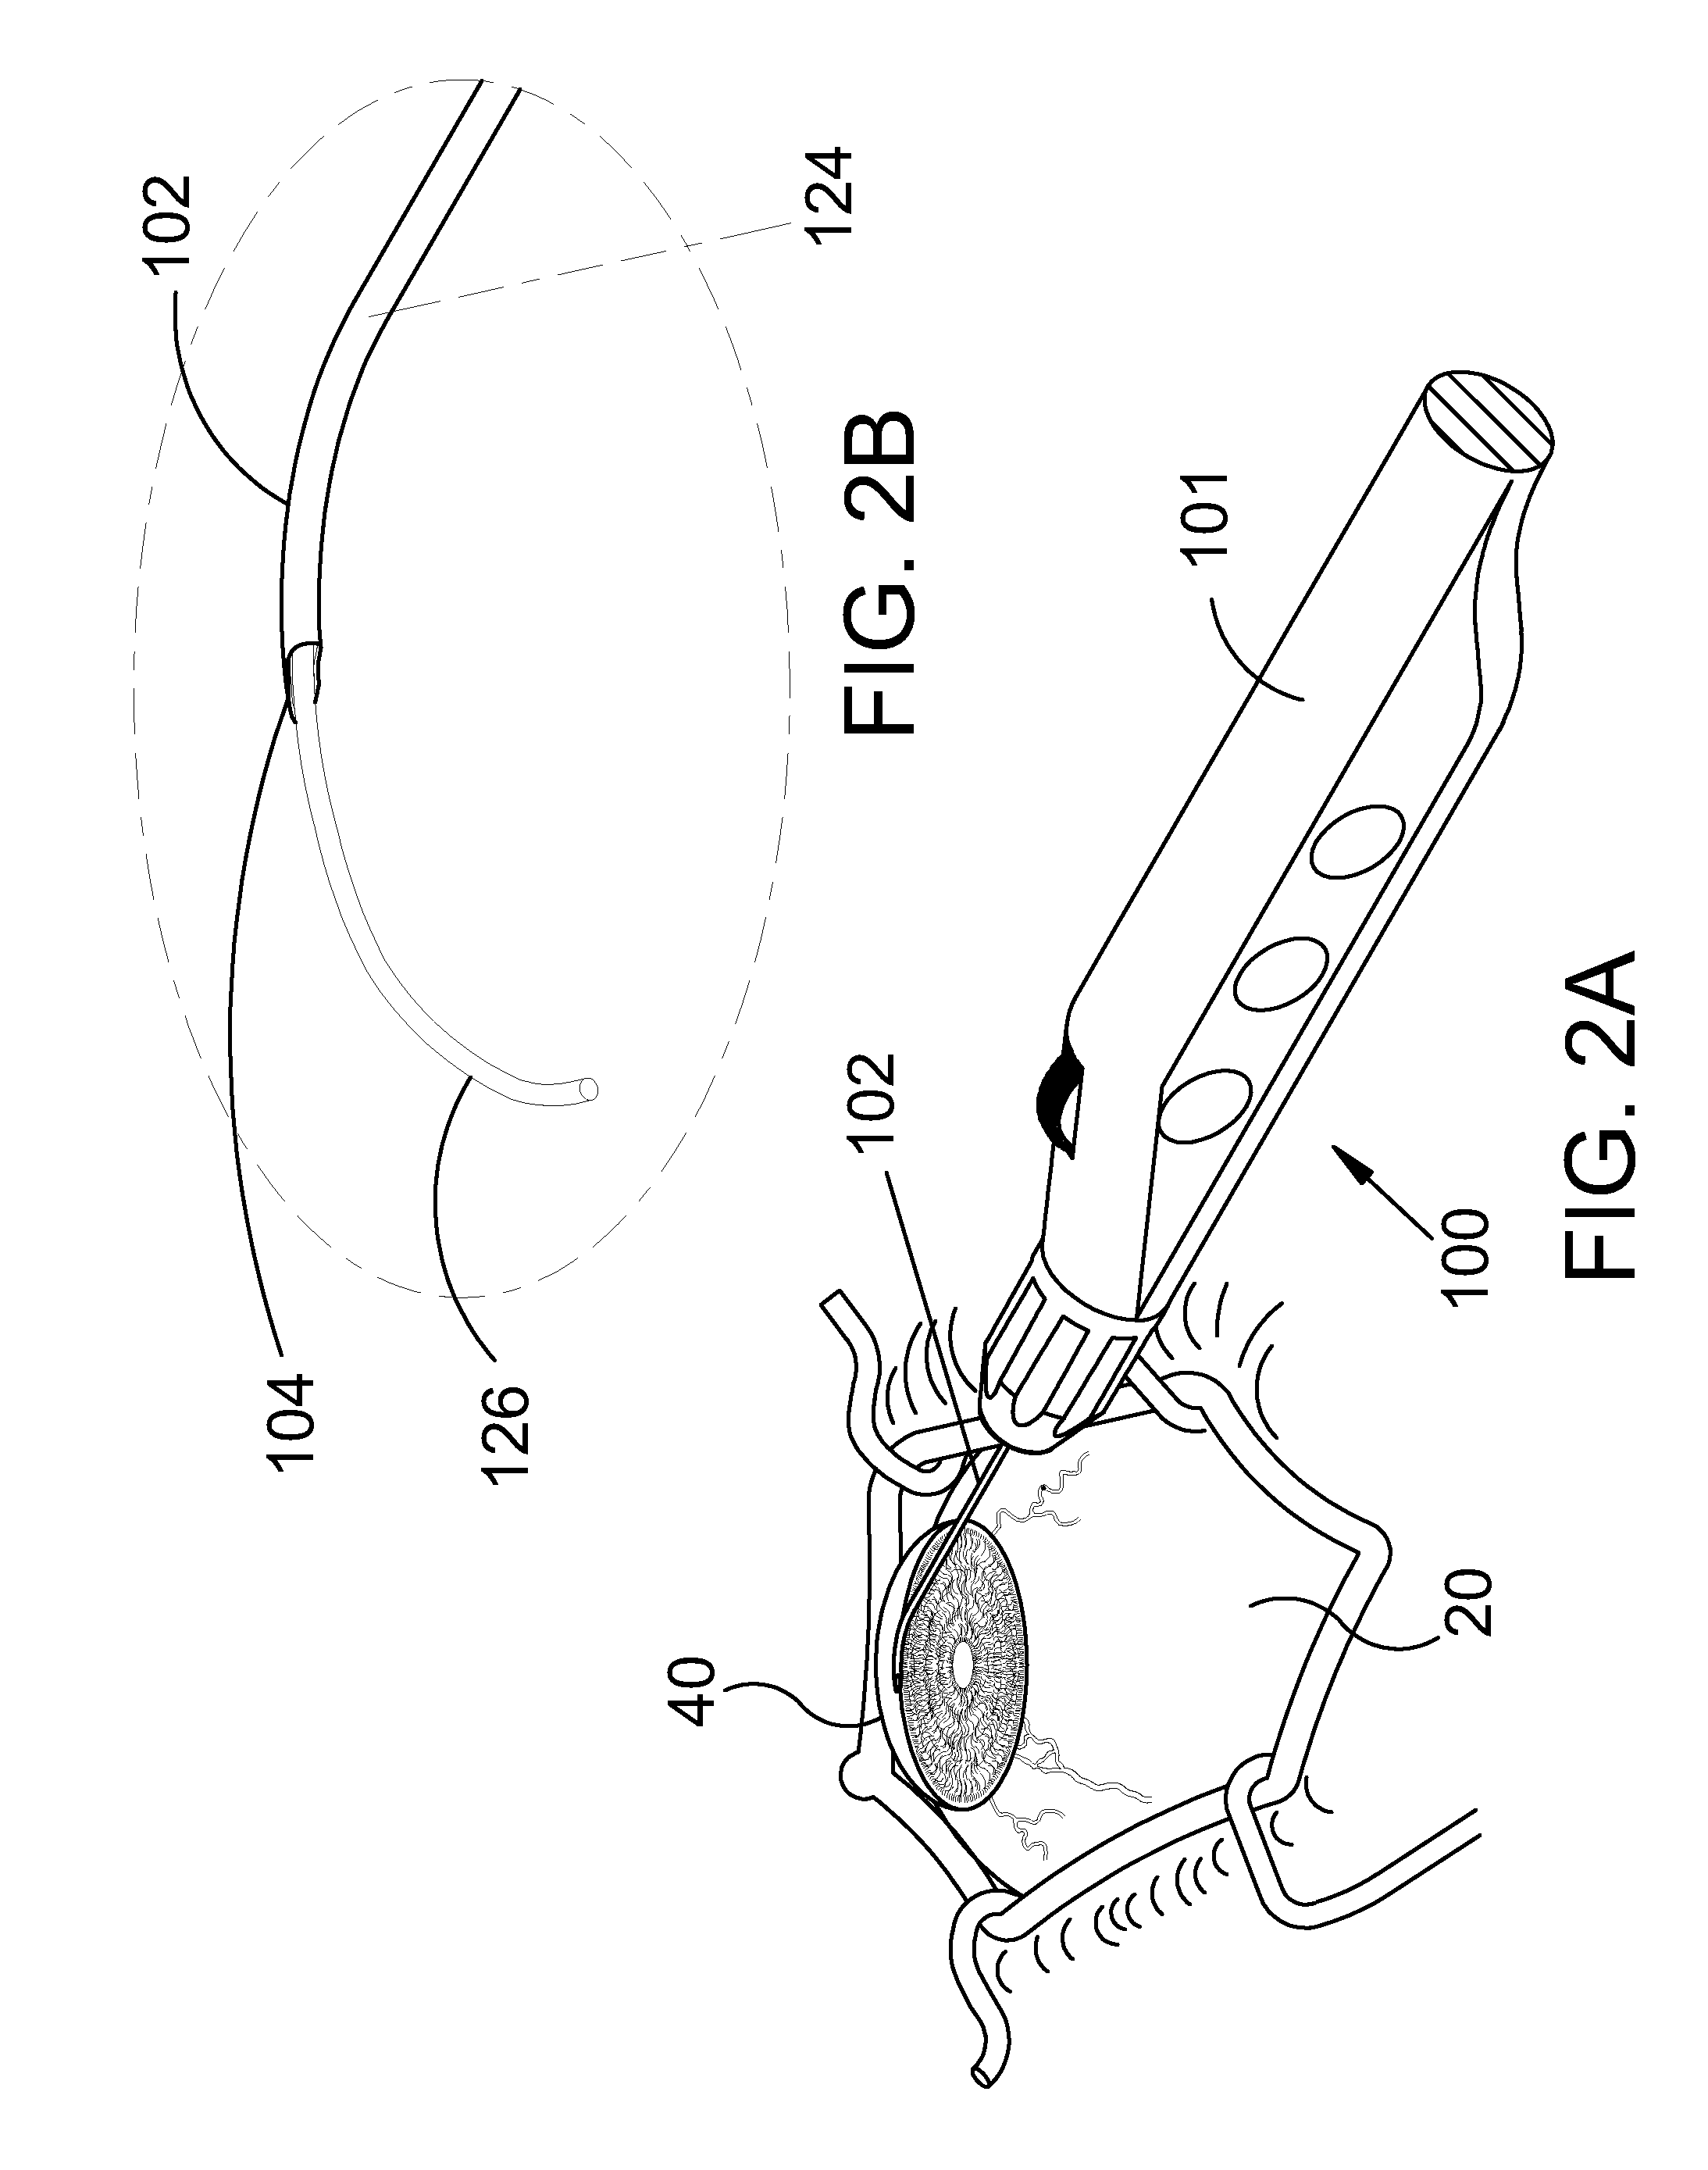 Ocular Implant System and Method